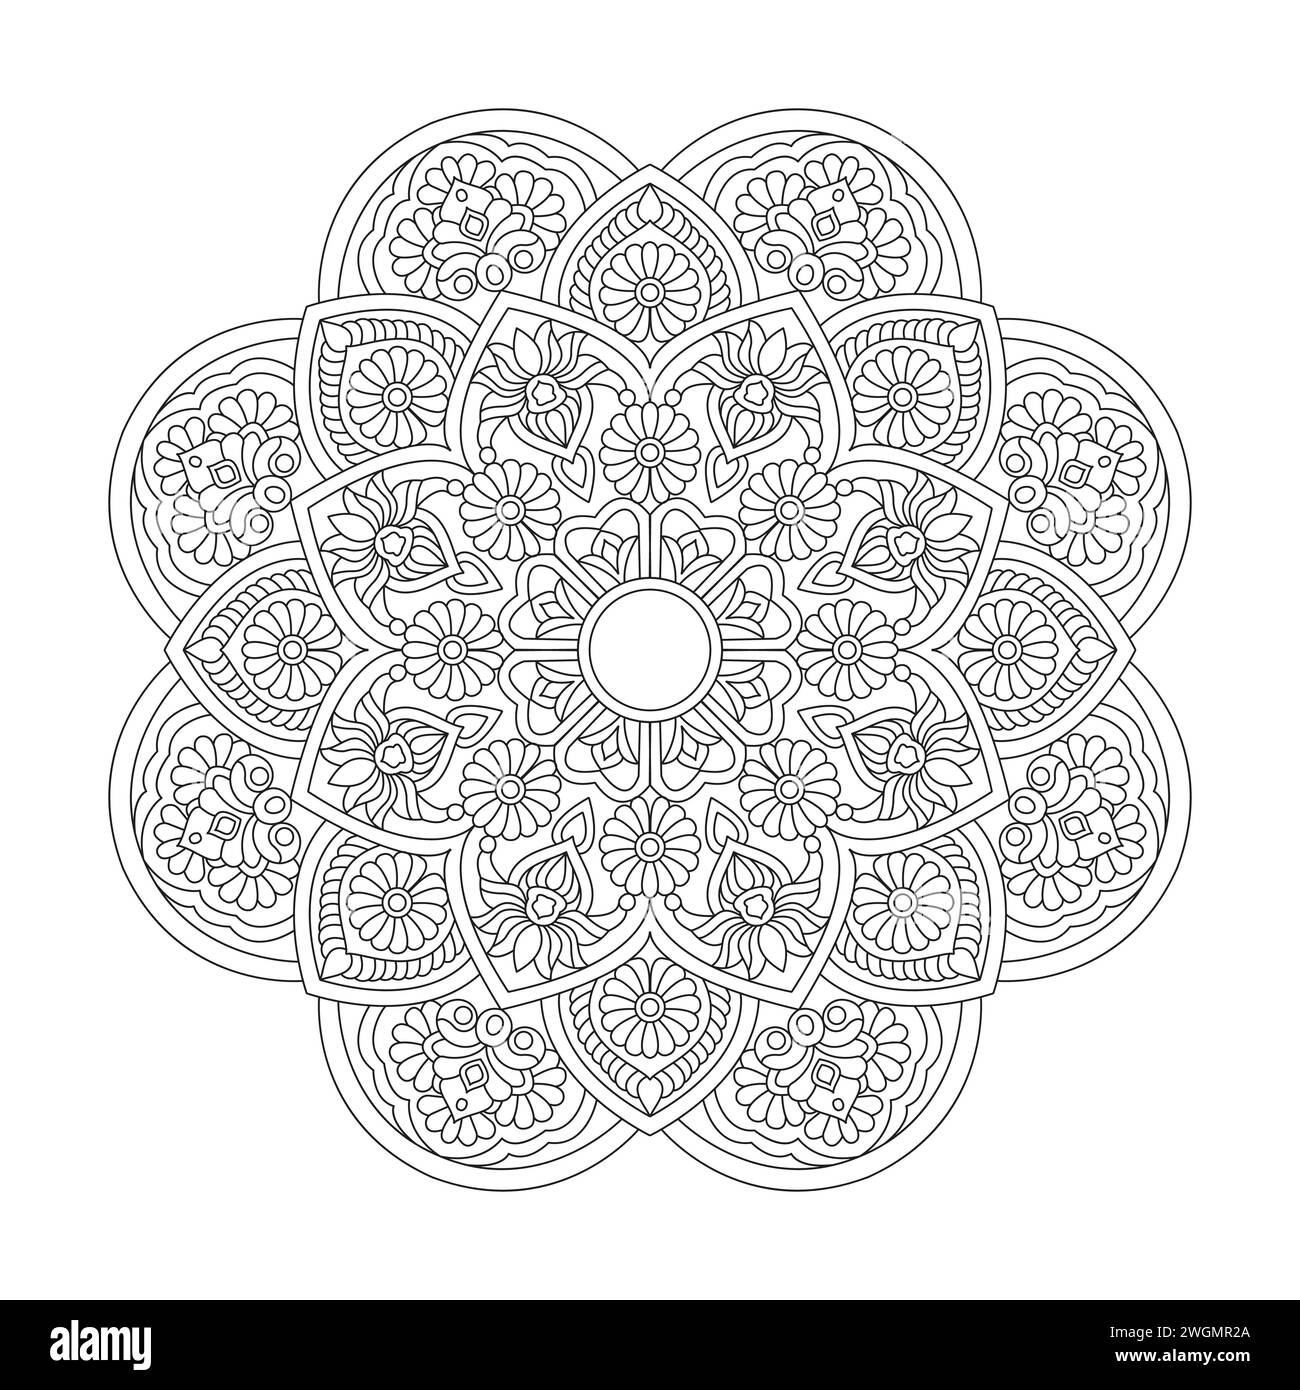 Peaceful Whirlwind Mandala Coloring Book Page for kdp Book Interior. Peaceful Petals, Ability to Relax, Brain Experiences, Harmonious Haven, Peaceful Stock Vector